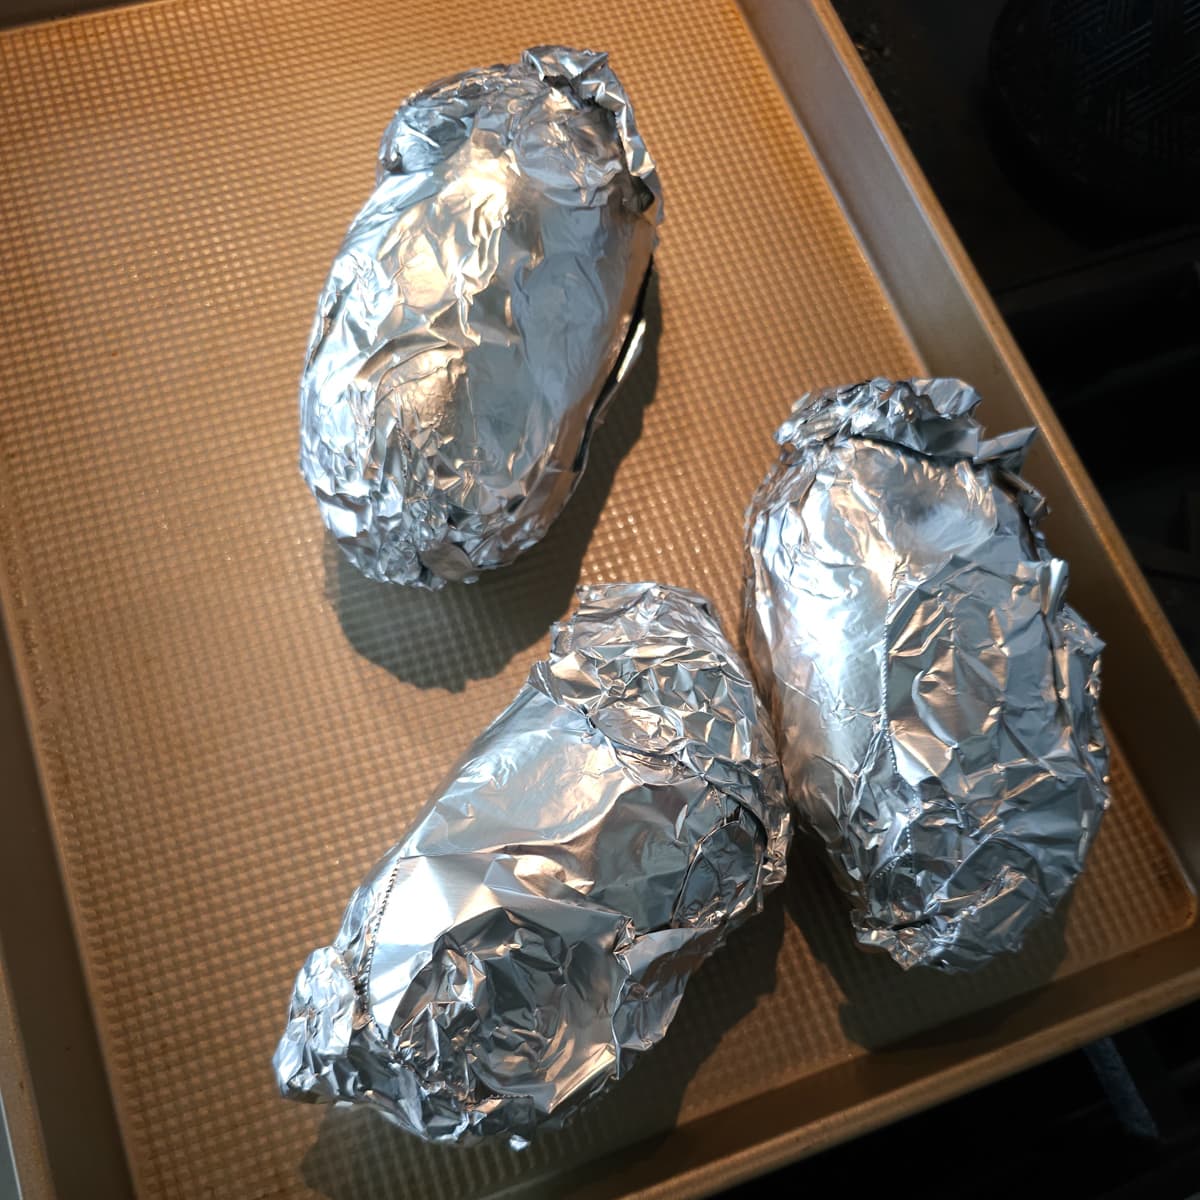 Potatoes wrapped in foil.